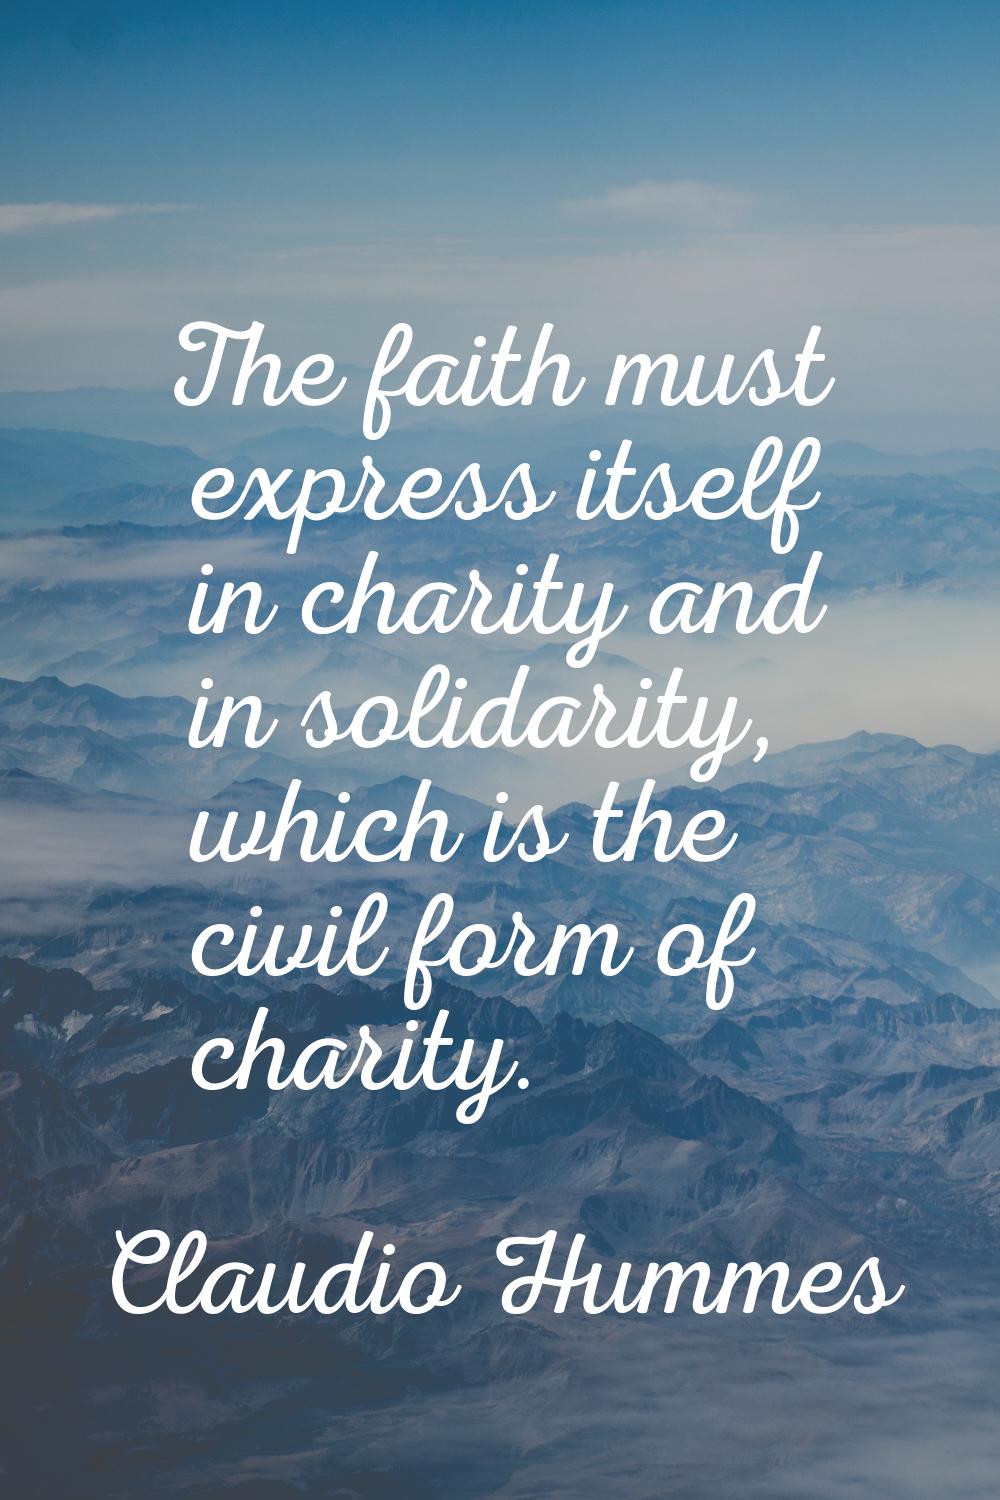 The faith must express itself in charity and in solidarity, which is the civil form of charity.